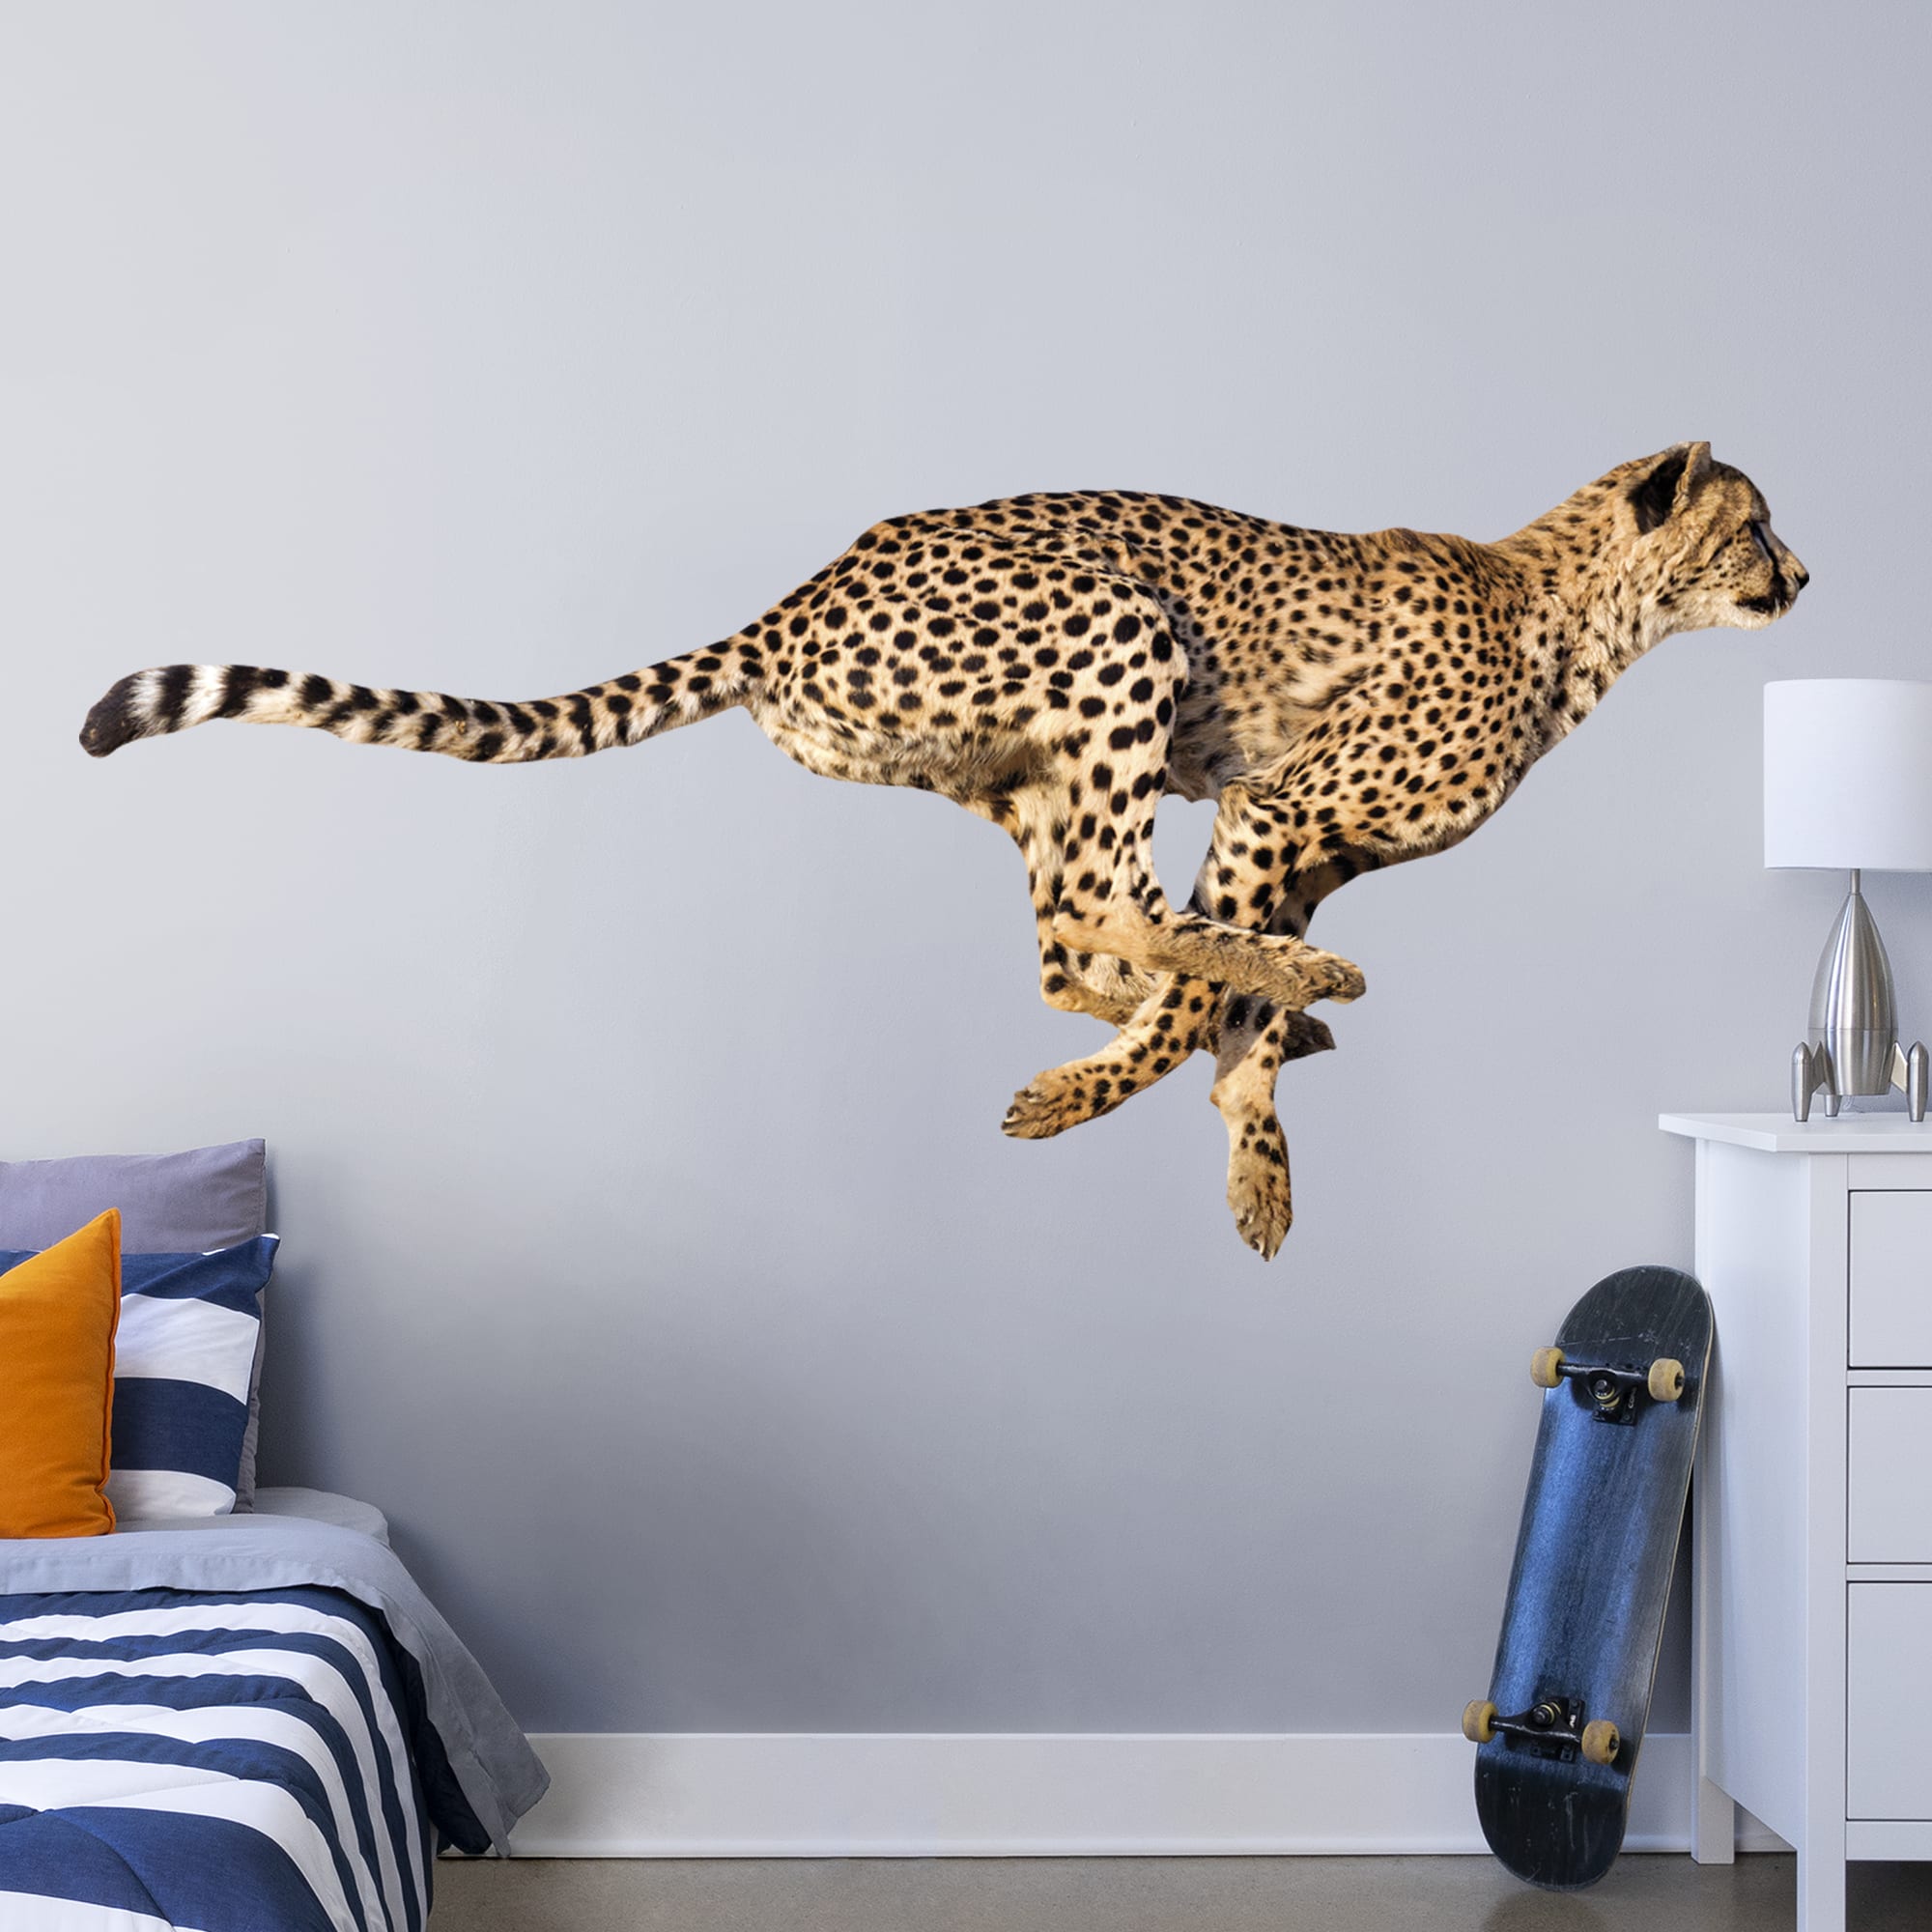 Cheetah - Removable Vinyl Decal Life-Size Animal + 2 Decals (89"W x 42"H) by Fathead